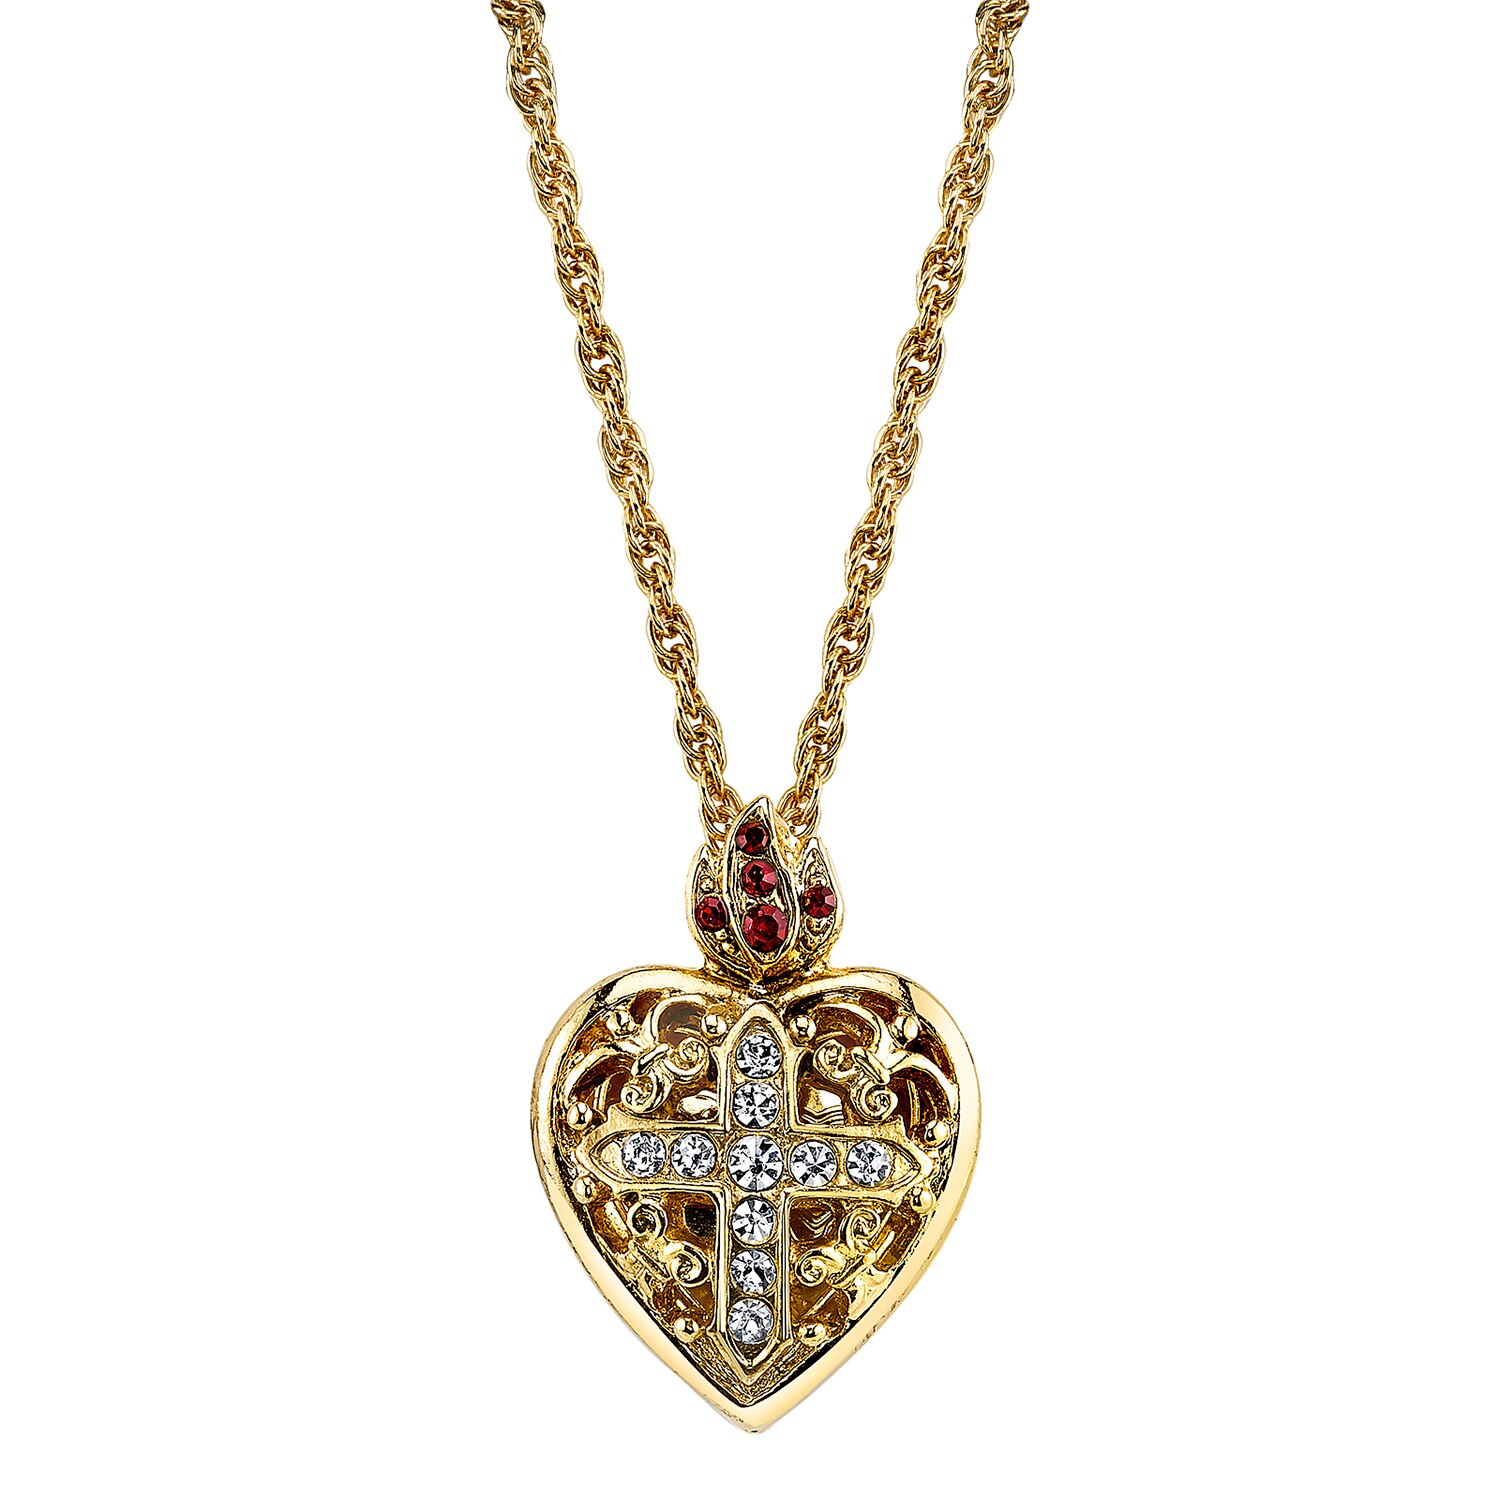 1928 Symbols of Faith 14K Gold Dipped Cross Heart Locket Necklace 18 inch chain